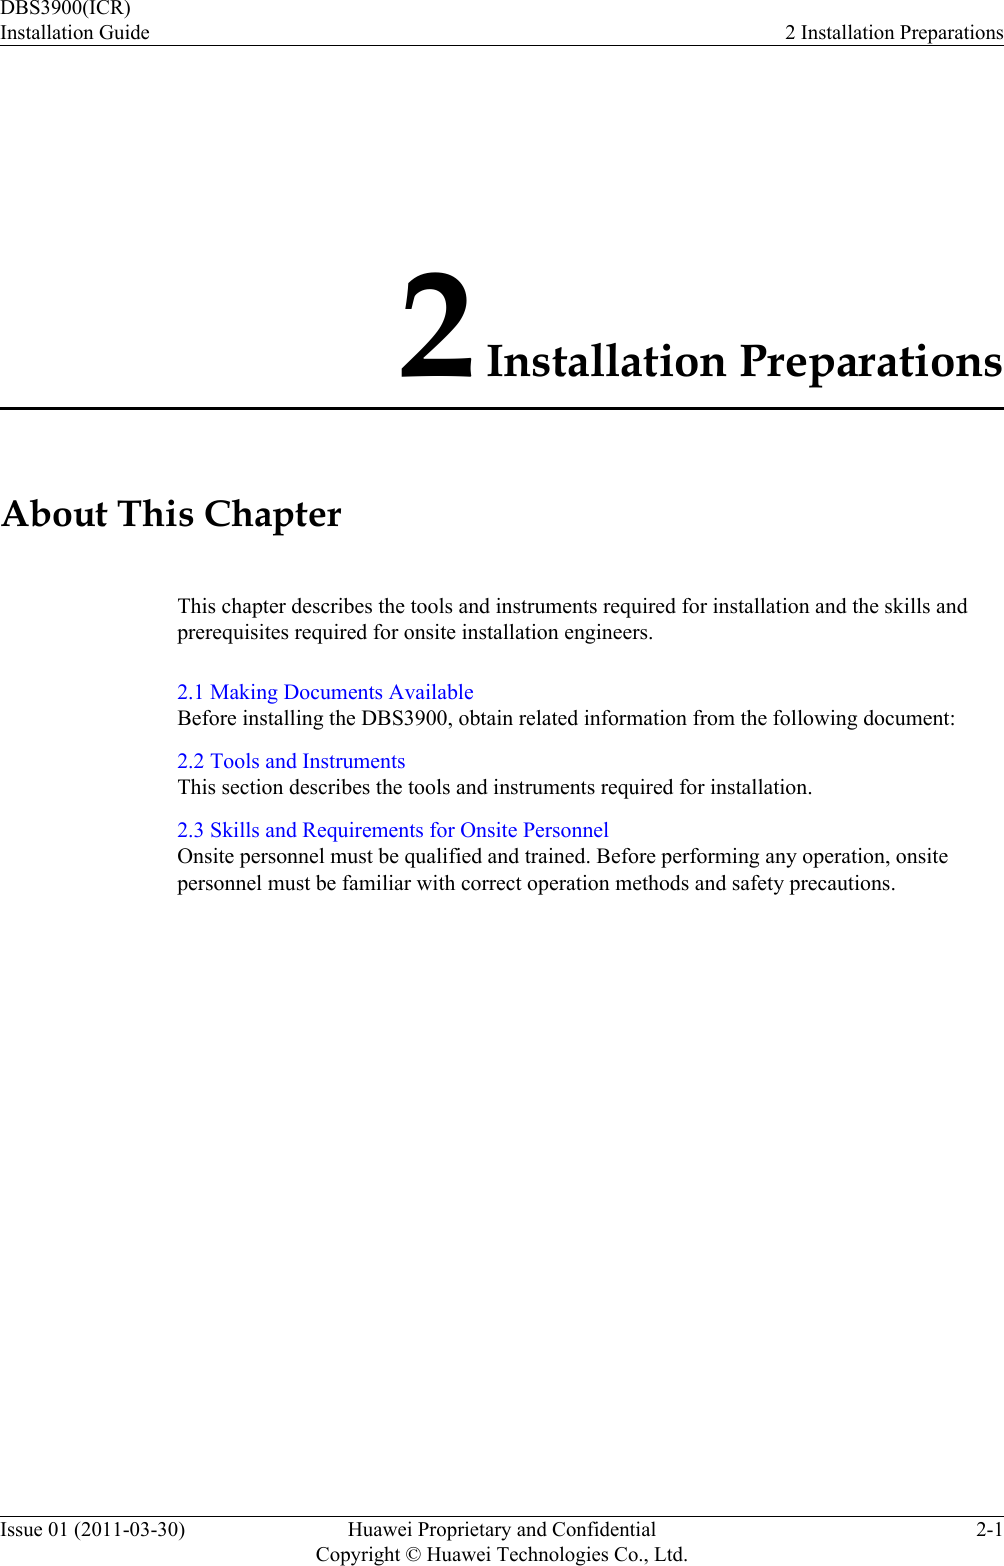 2 Installation PreparationsAbout This ChapterThis chapter describes the tools and instruments required for installation and the skills andprerequisites required for onsite installation engineers.2.1 Making Documents AvailableBefore installing the DBS3900, obtain related information from the following document:2.2 Tools and InstrumentsThis section describes the tools and instruments required for installation.2.3 Skills and Requirements for Onsite PersonnelOnsite personnel must be qualified and trained. Before performing any operation, onsitepersonnel must be familiar with correct operation methods and safety precautions.DBS3900(ICR)Installation Guide 2 Installation PreparationsIssue 01 (2011-03-30) Huawei Proprietary and ConfidentialCopyright © Huawei Technologies Co., Ltd.2-1